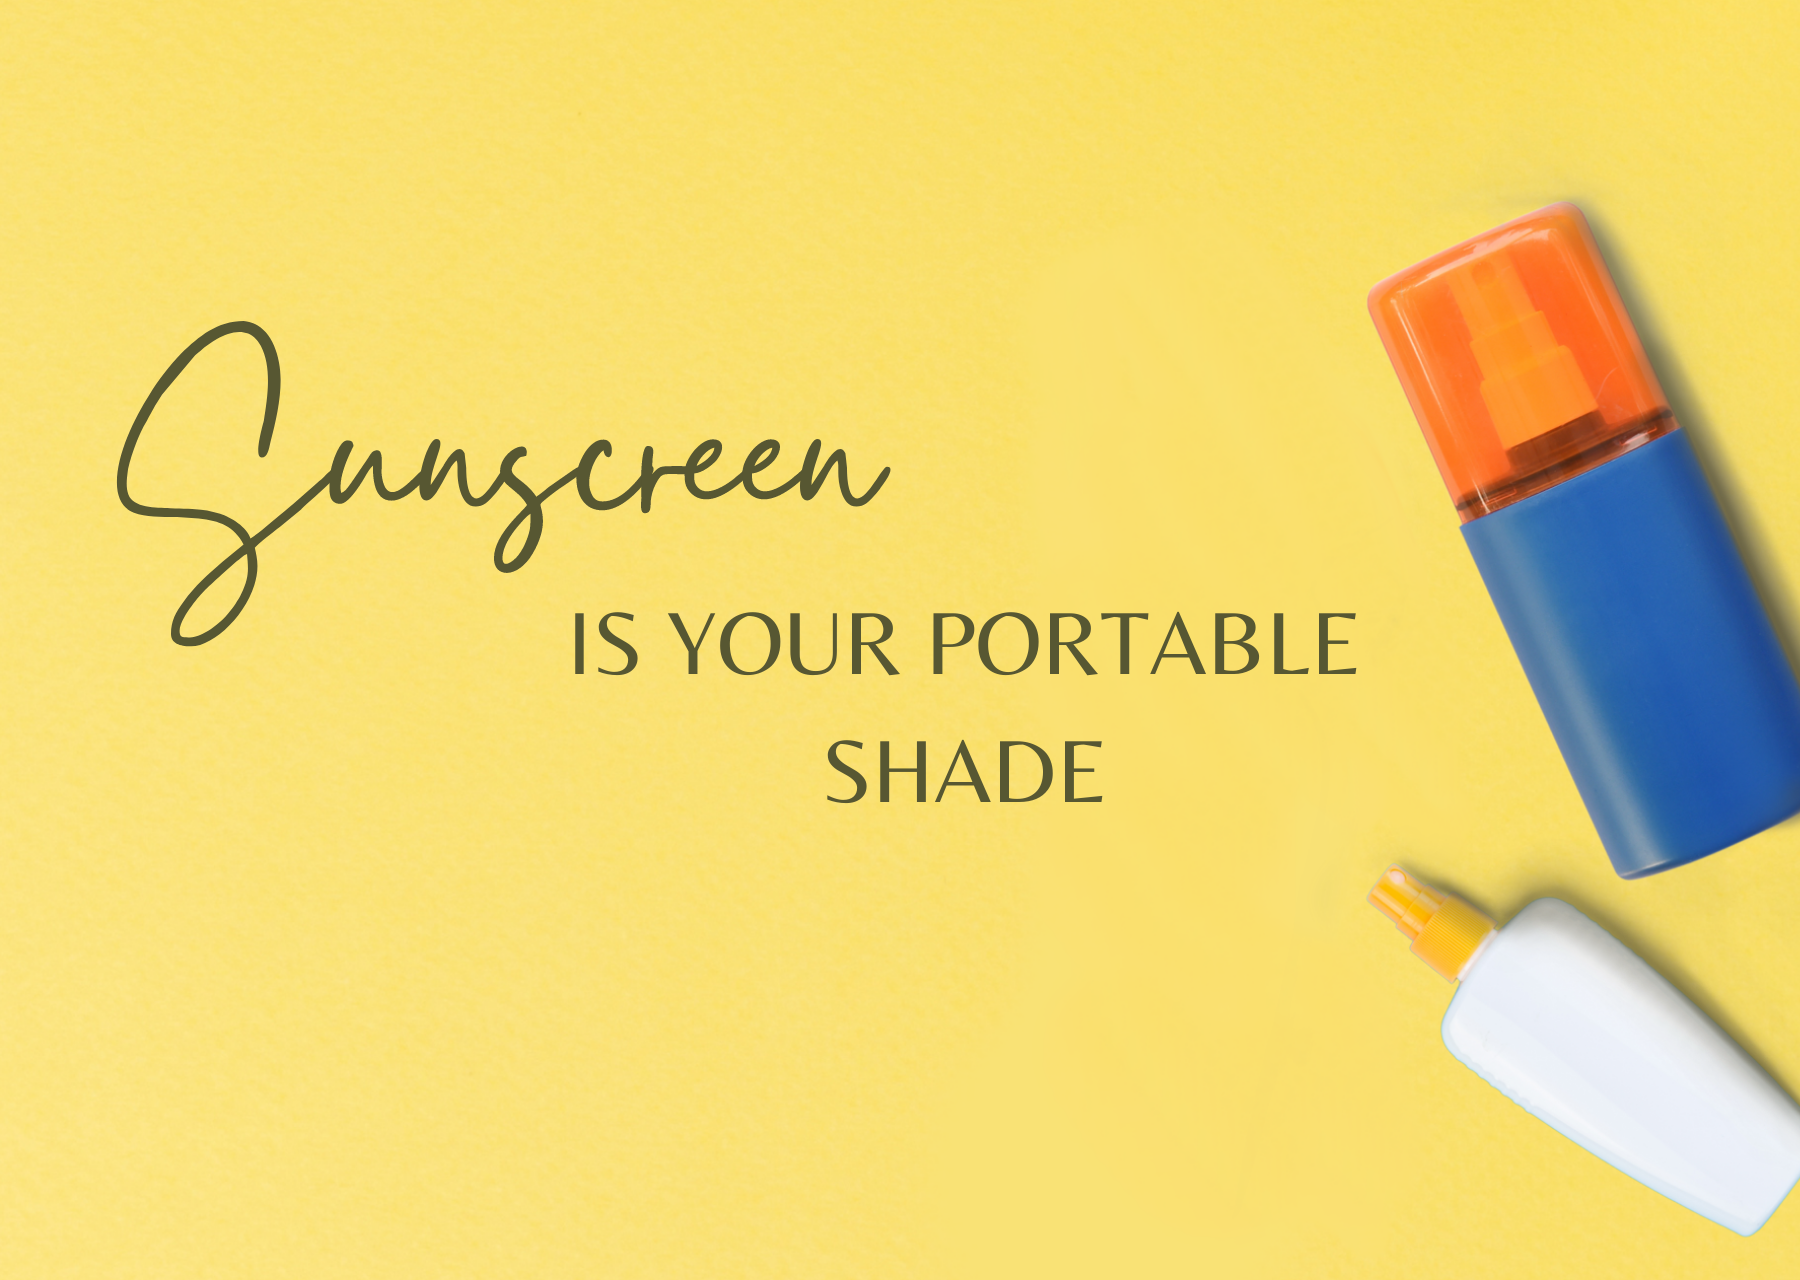 Sunscreen is your portable shade